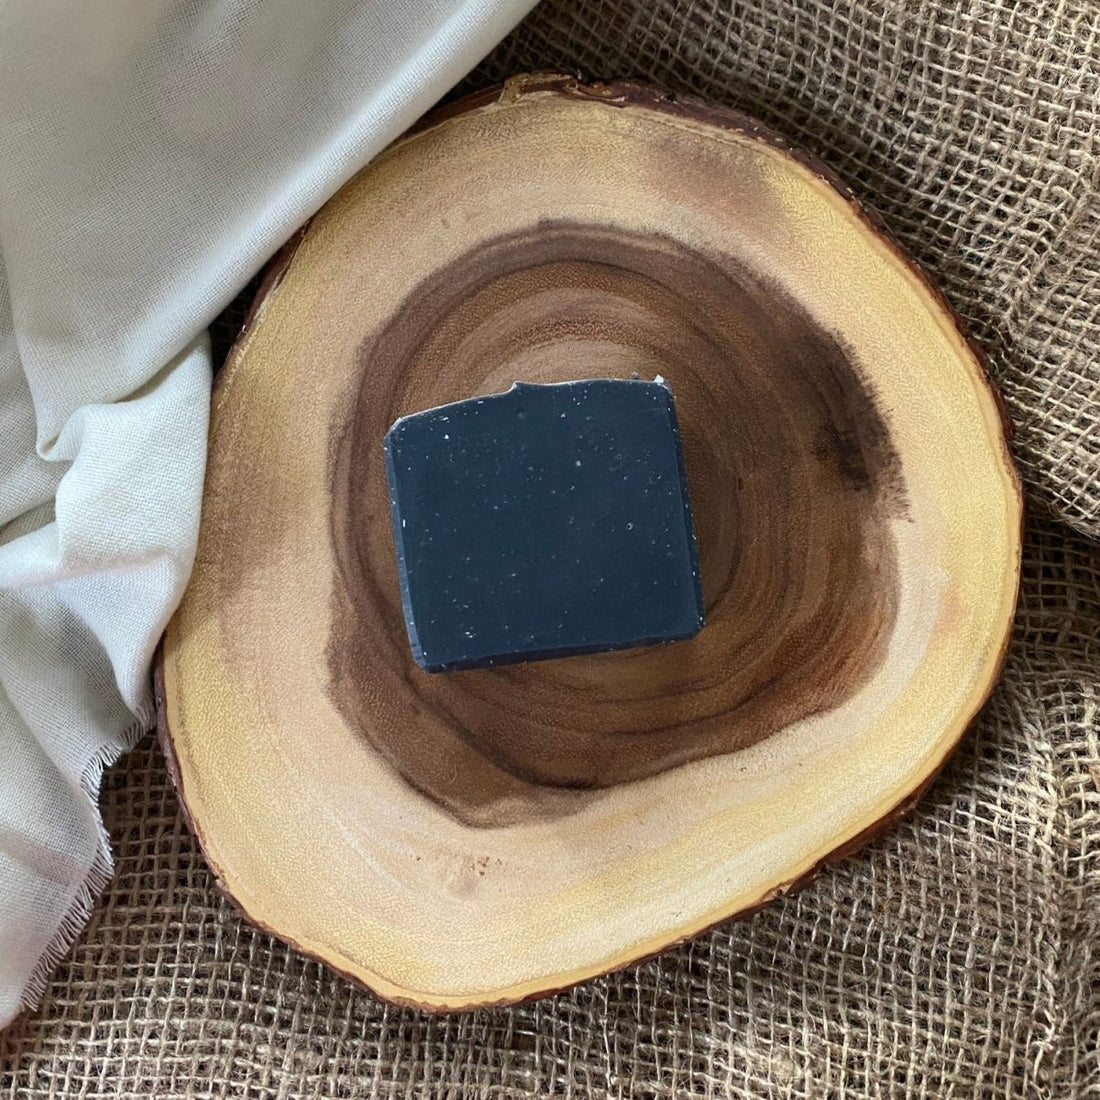 Cleansing Charcoal Bar for Blemish and Acne Prone Skin - 100g - Forage Market - Lazuli Farms